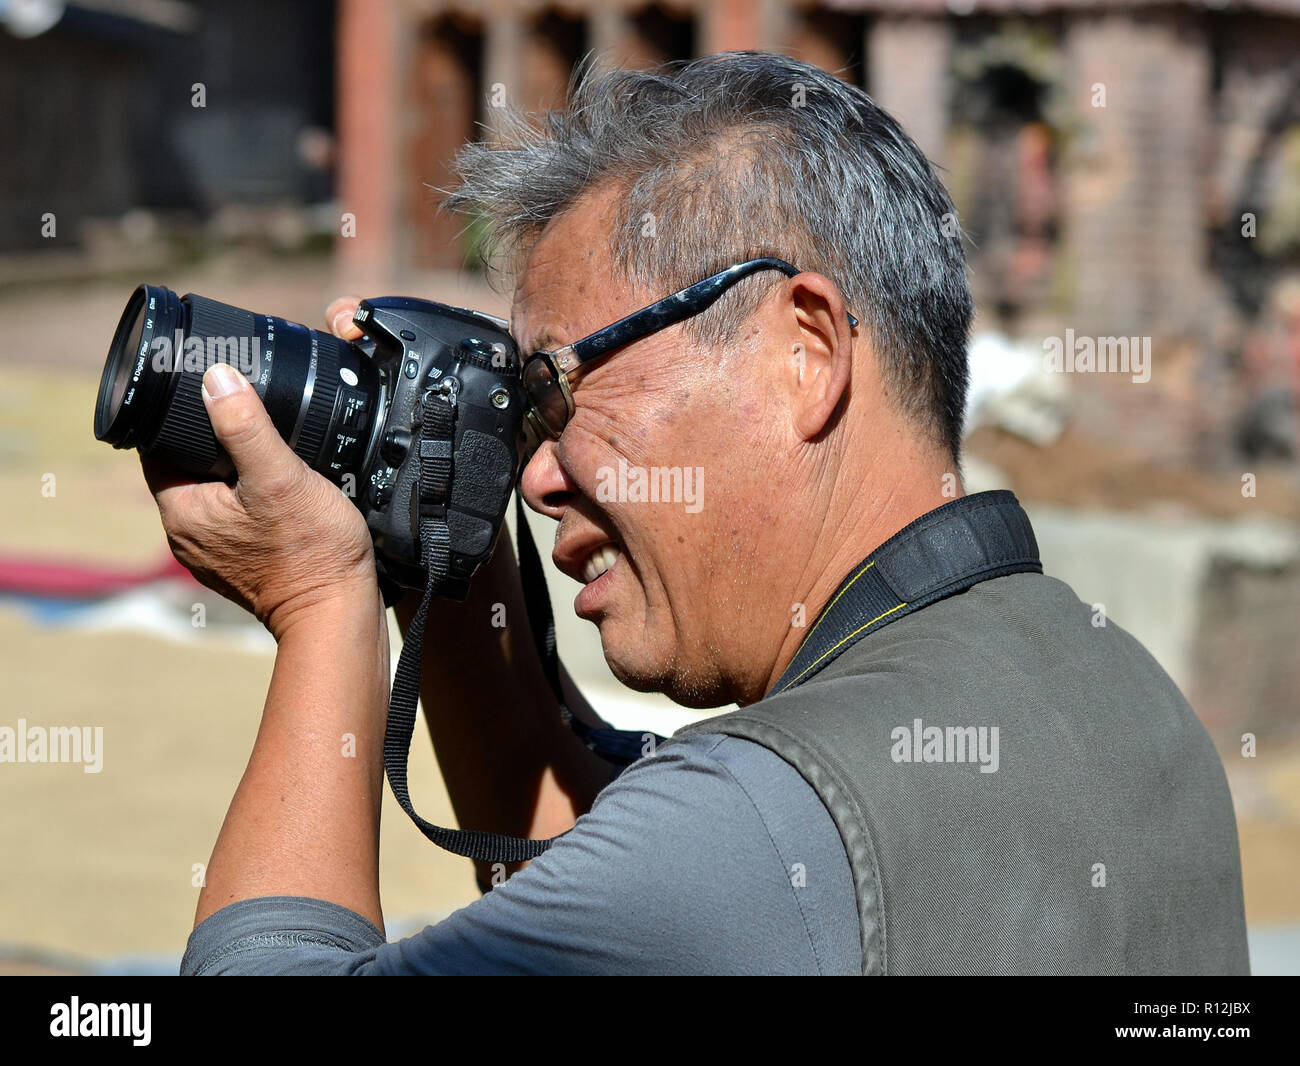 Middle-aged Chinese male street photographer takes aim with his Nikon DSLR camera. Stock Photo